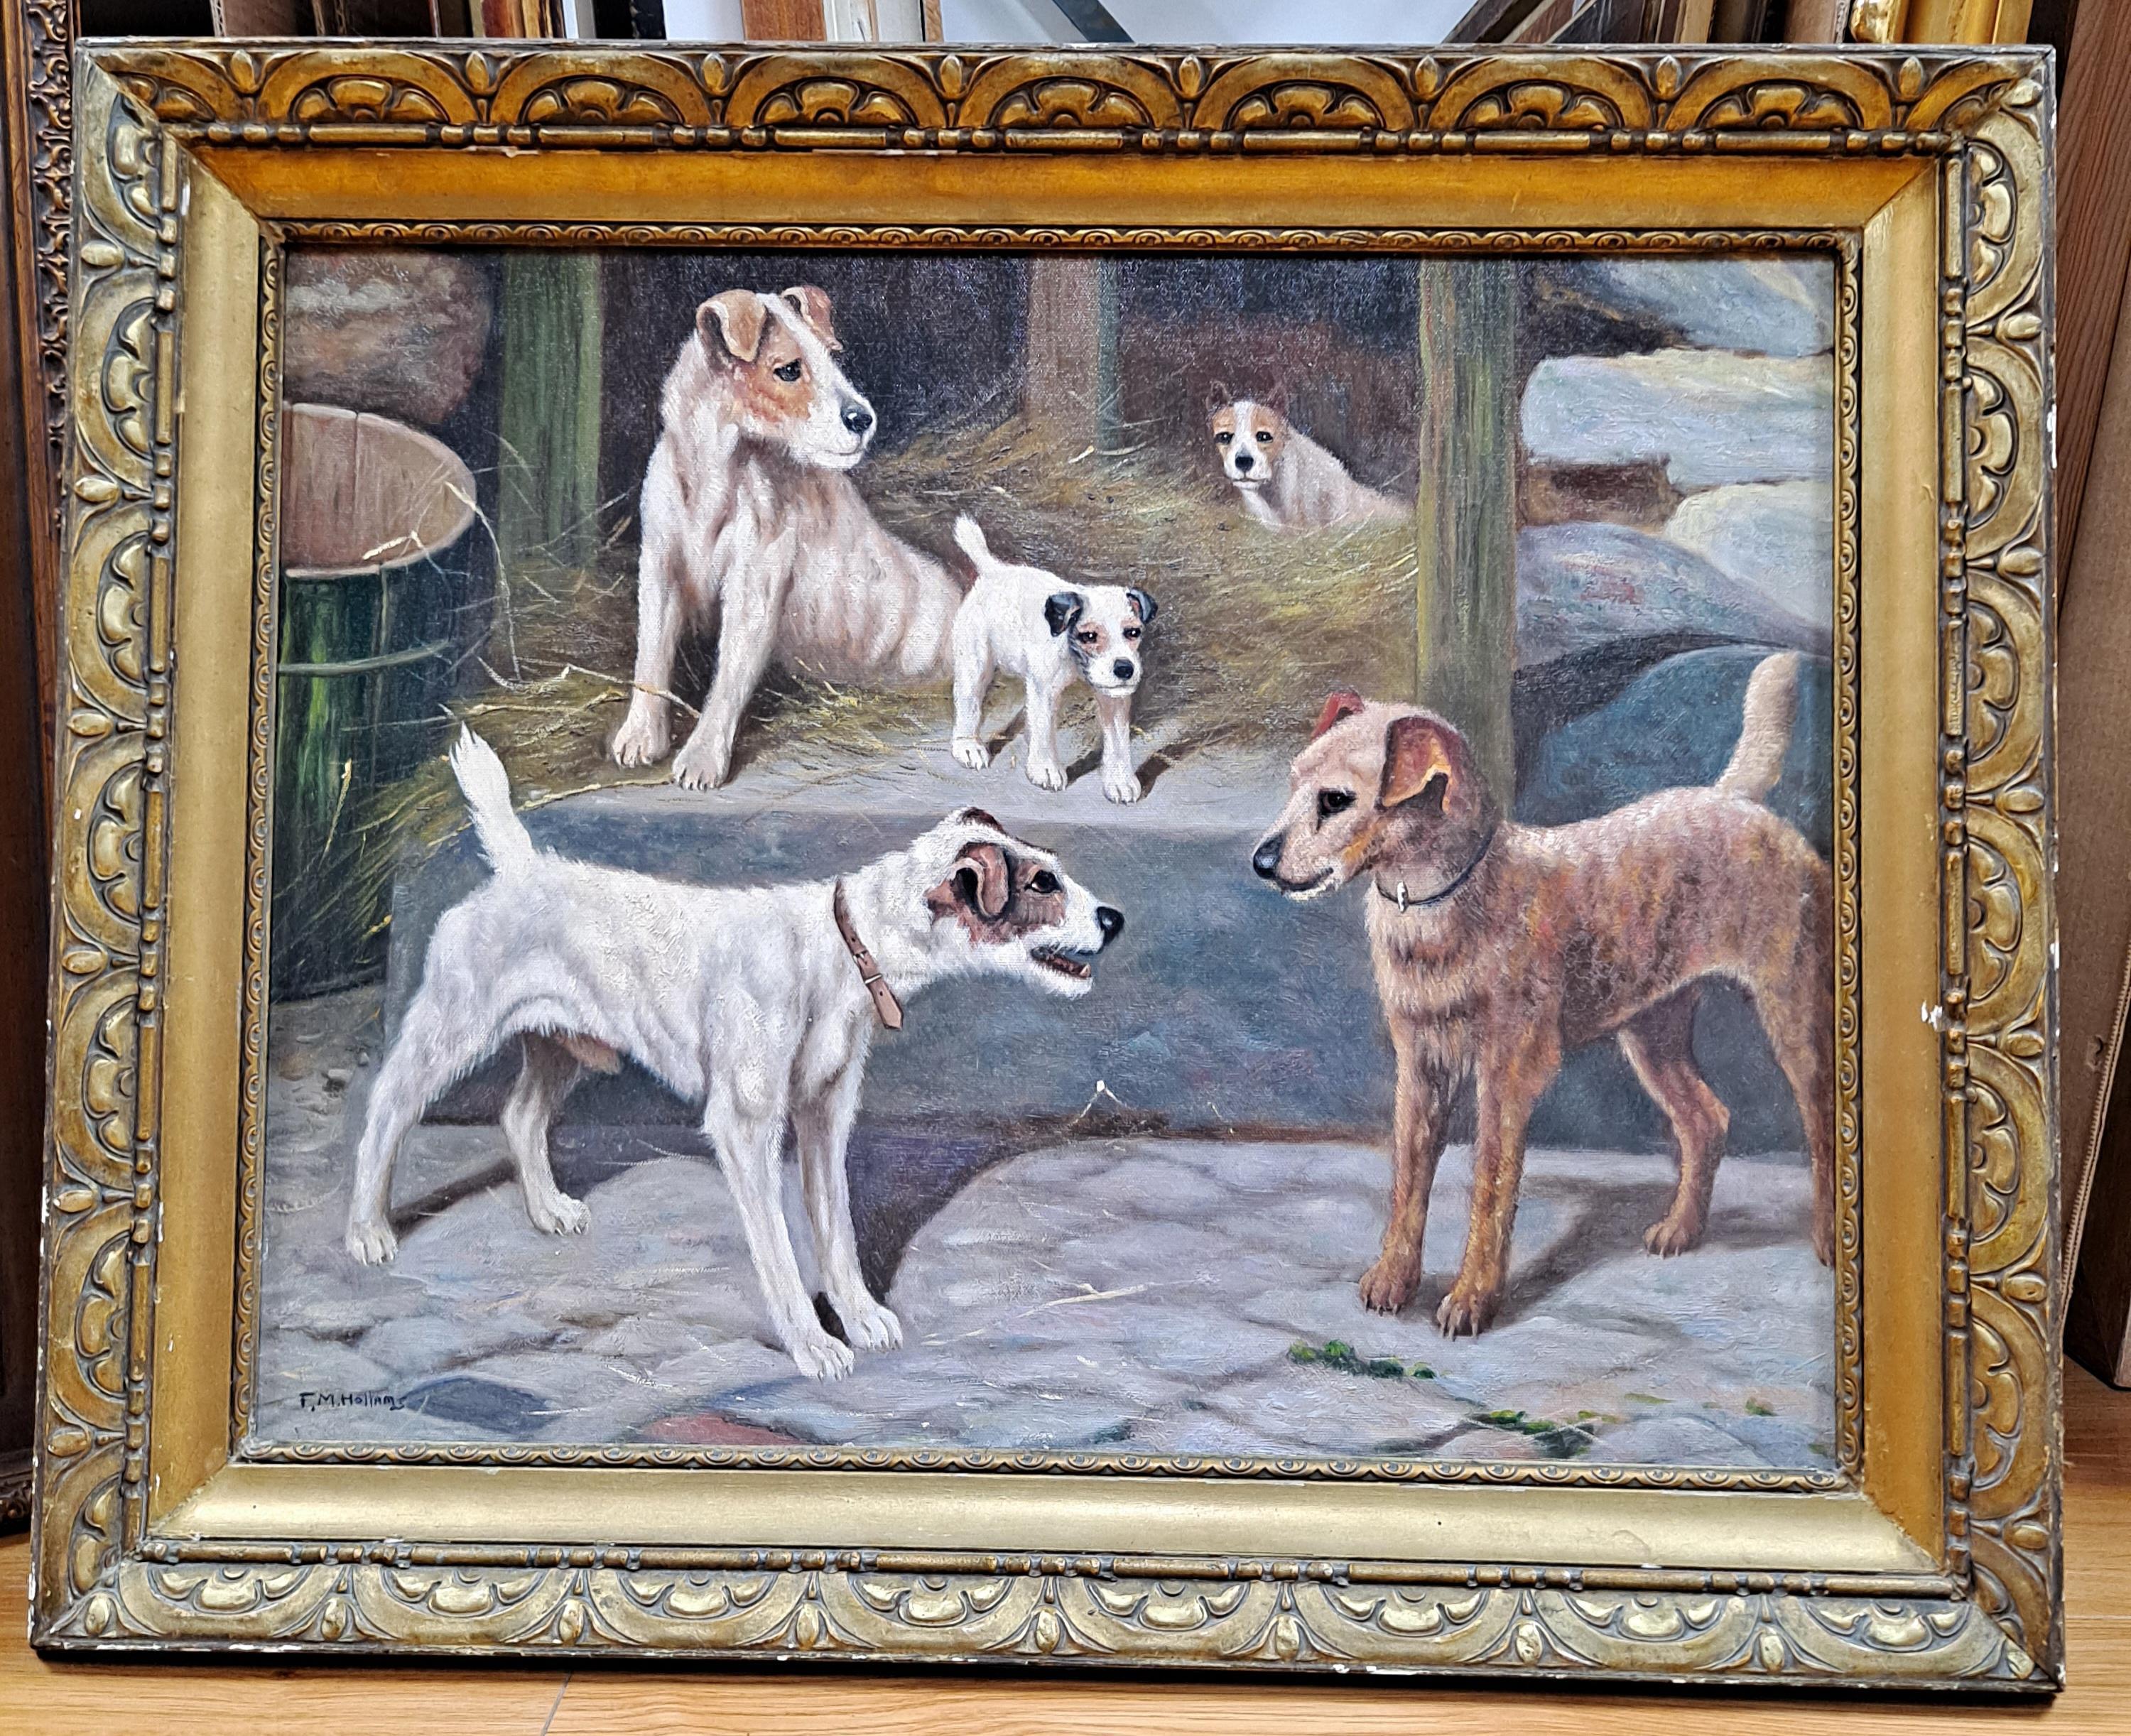 Frances (Florence) Mabel Hollams Animal Painting - F. M. Hollams (1877-1963) Jack Russells in a Barn Oil on Canvas Board Painting  